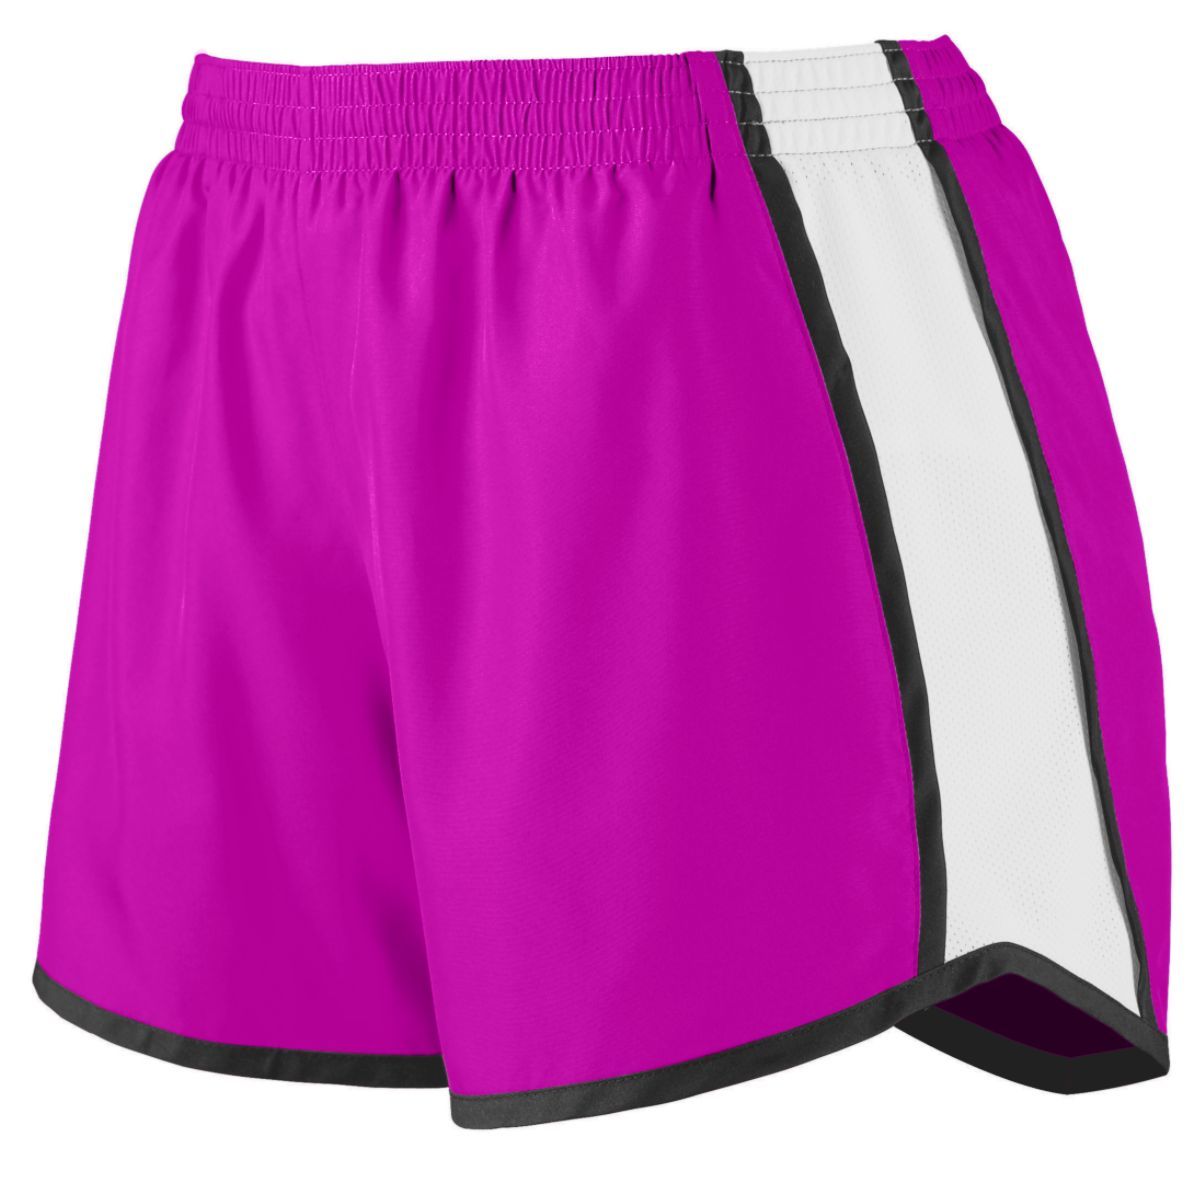 Augusta Sportswear Girls Pulse Team Shorts in Power Pink/White/Black  -Part of the Girls, Augusta-Products, Volleyball, Girls-Shorts product lines at KanaleyCreations.com